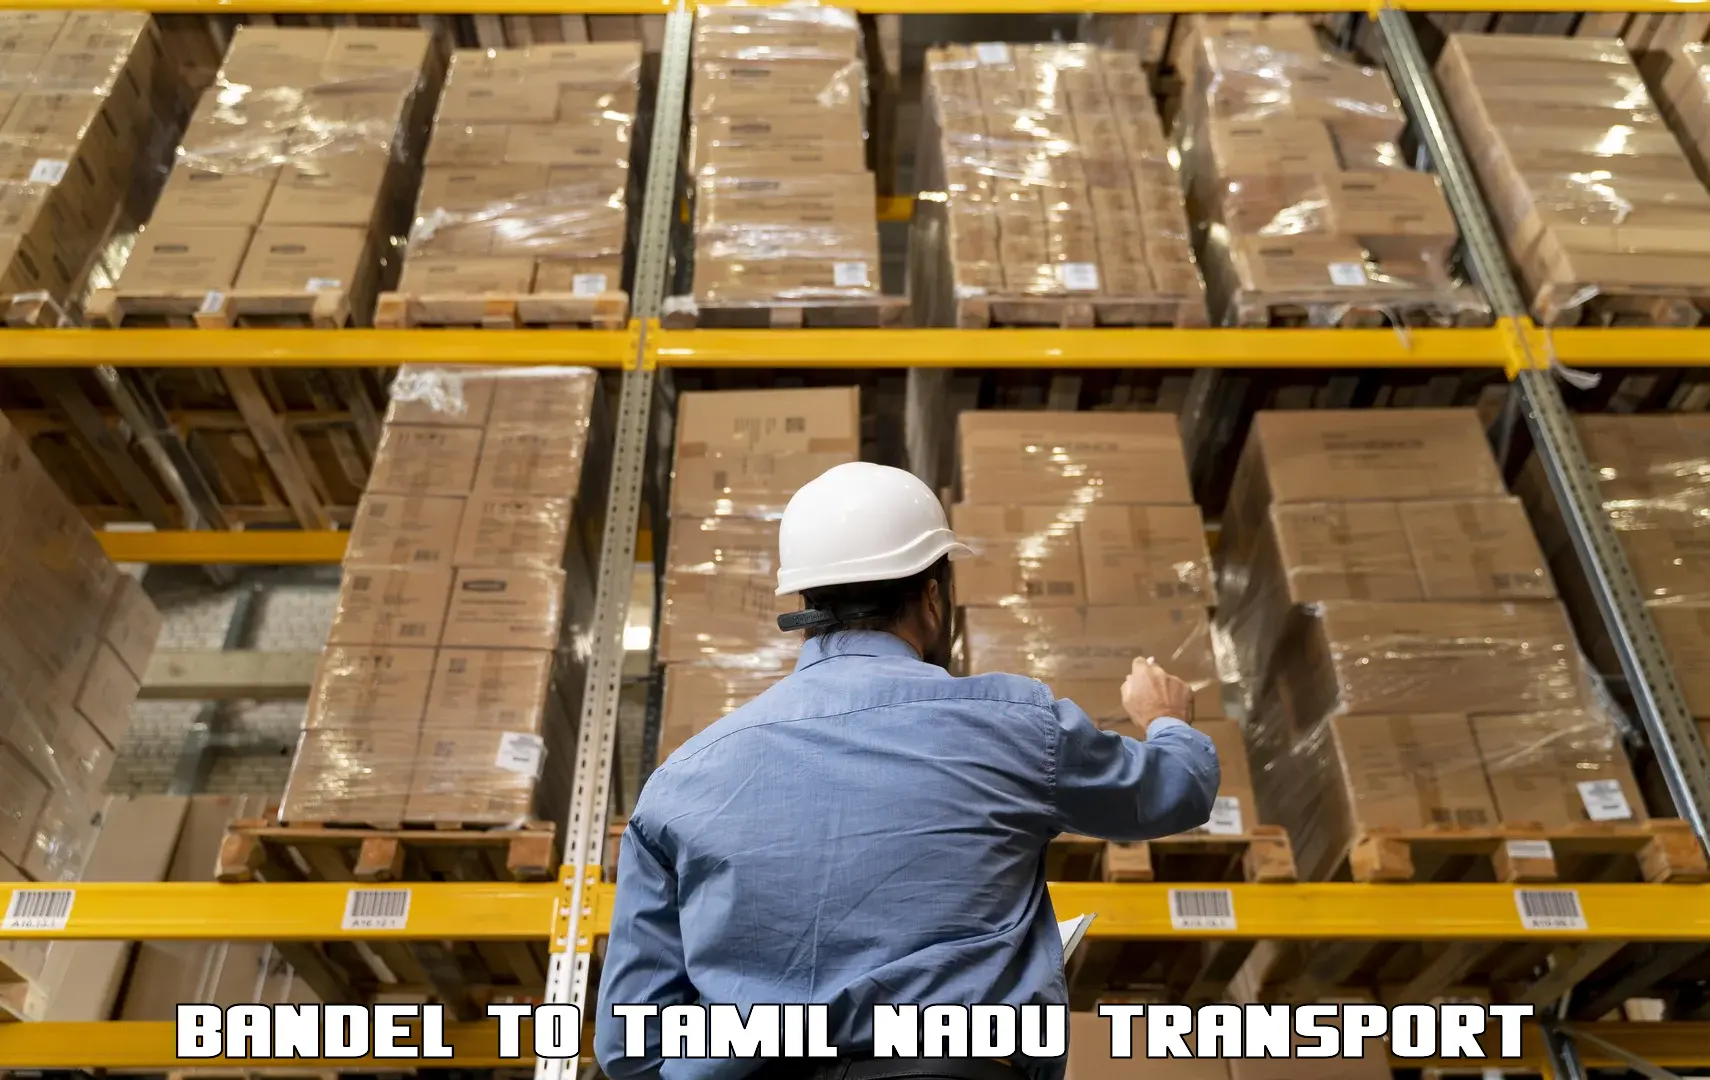 Part load transport service in India Bandel to Omalur